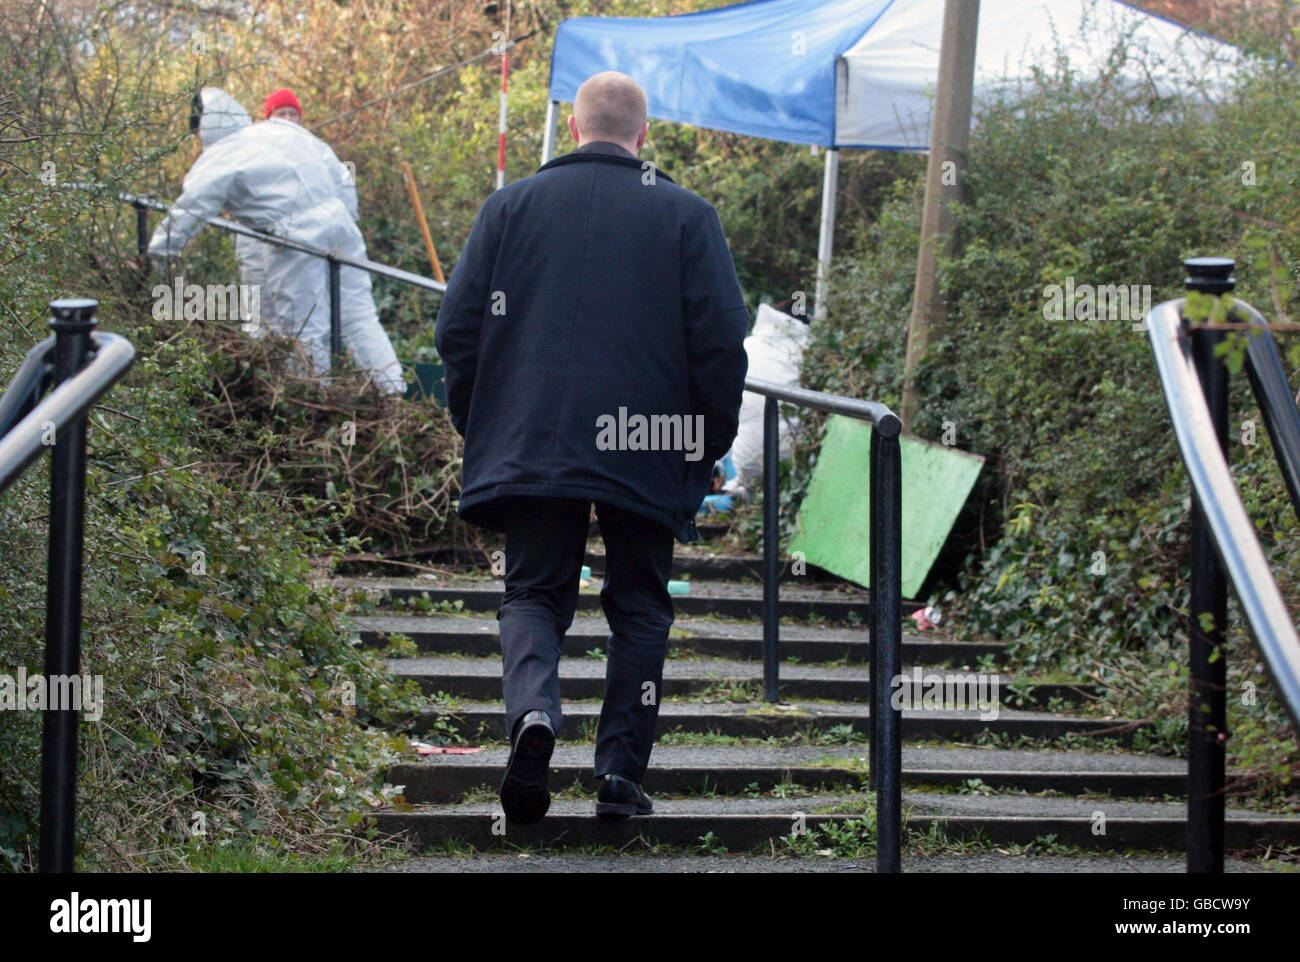 Police carry out a search of undergrowth in the Granton area of Edinburgh after the human remains were found there and is thought to belong to Heather Stacey, whose badly decomposed head was found in an Ikea bag on a footpath in Newhaven, in the Scots capital, on Wednesday, December 31. Stock Photo